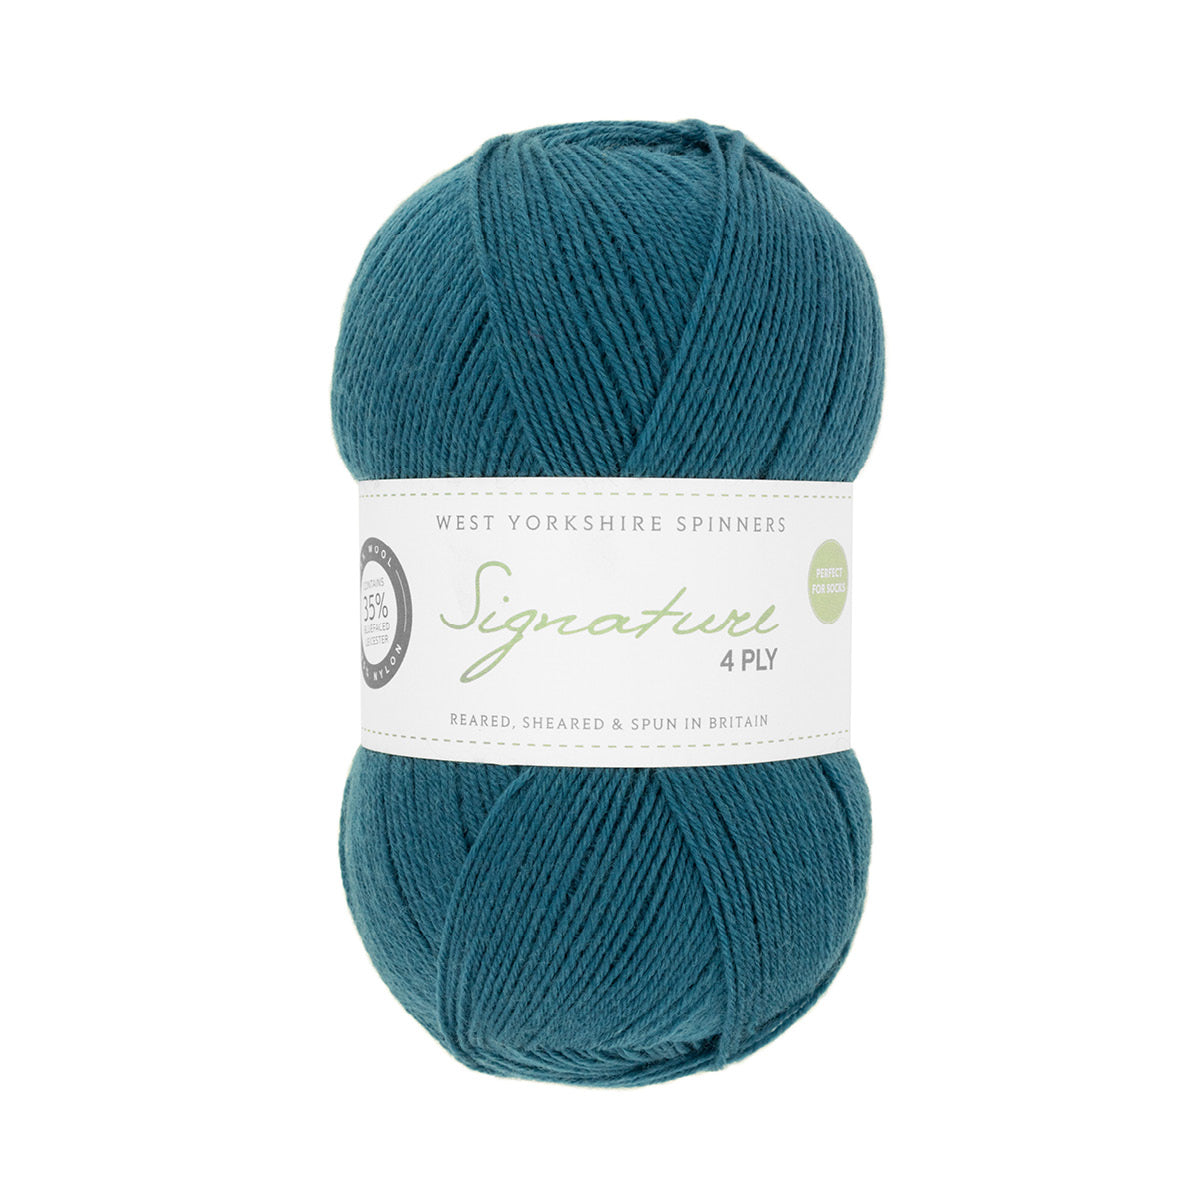 West Yorkshire Spinners Signature 4ply - Happy Feet Collection